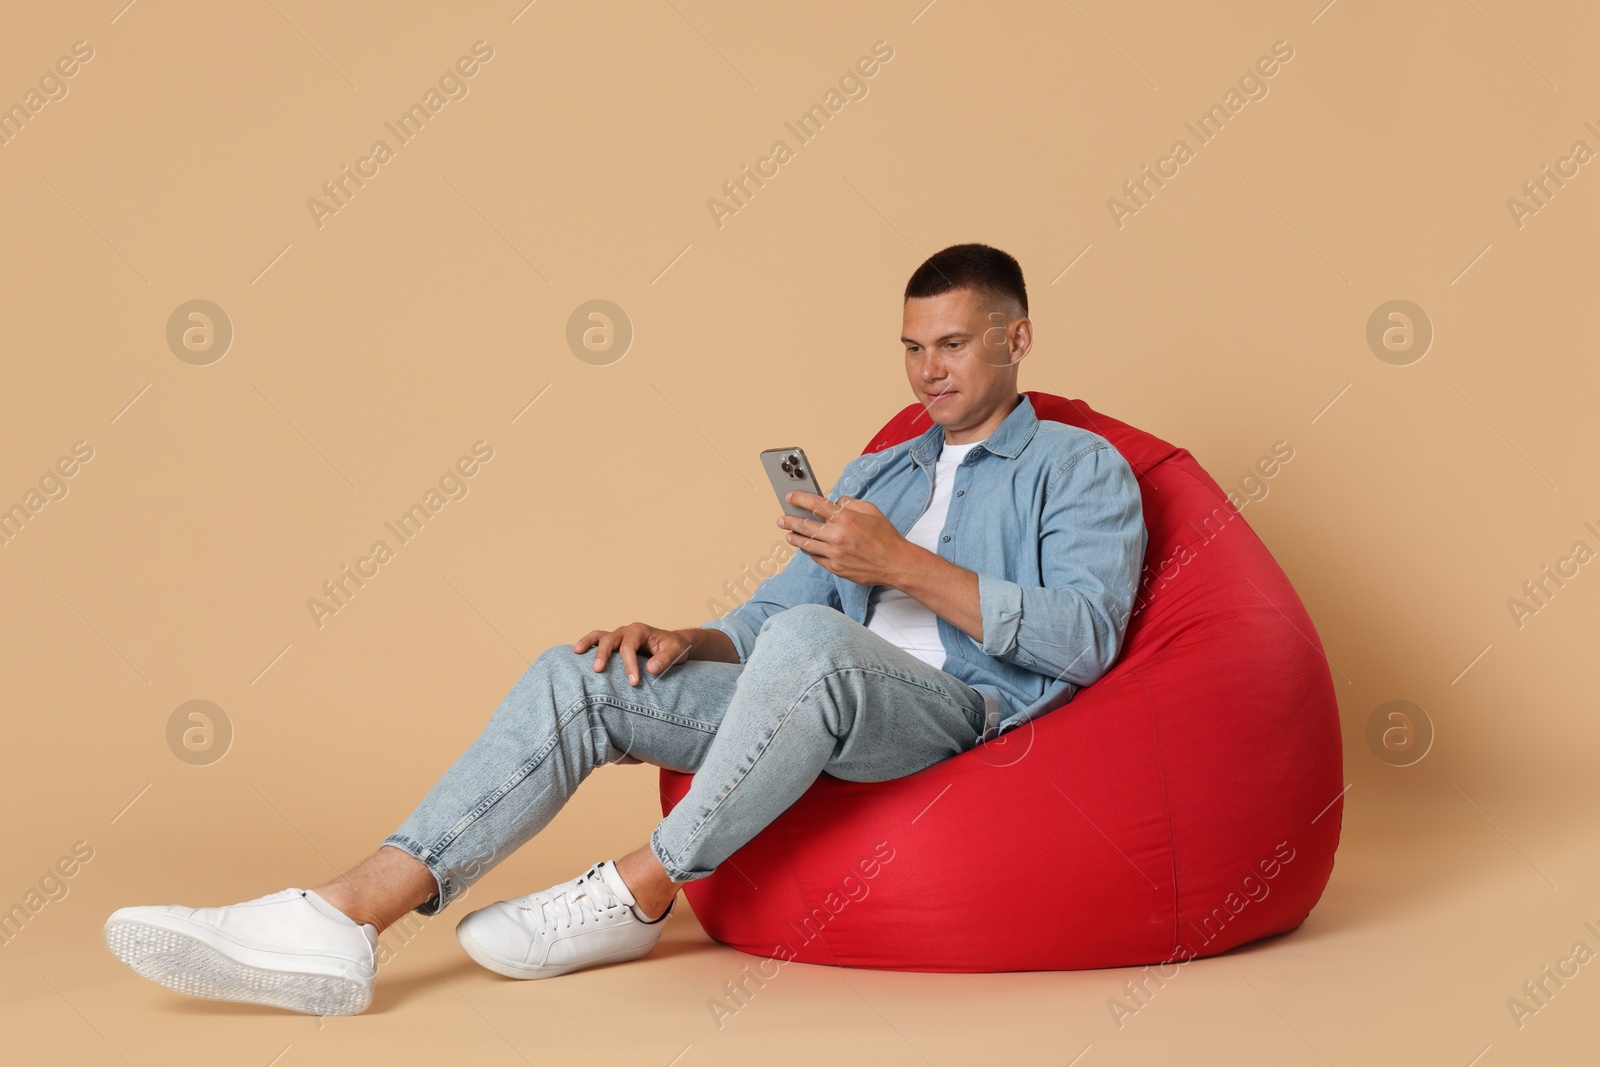 Photo of Handsome man with smartphone on red bean bag chair against beige background